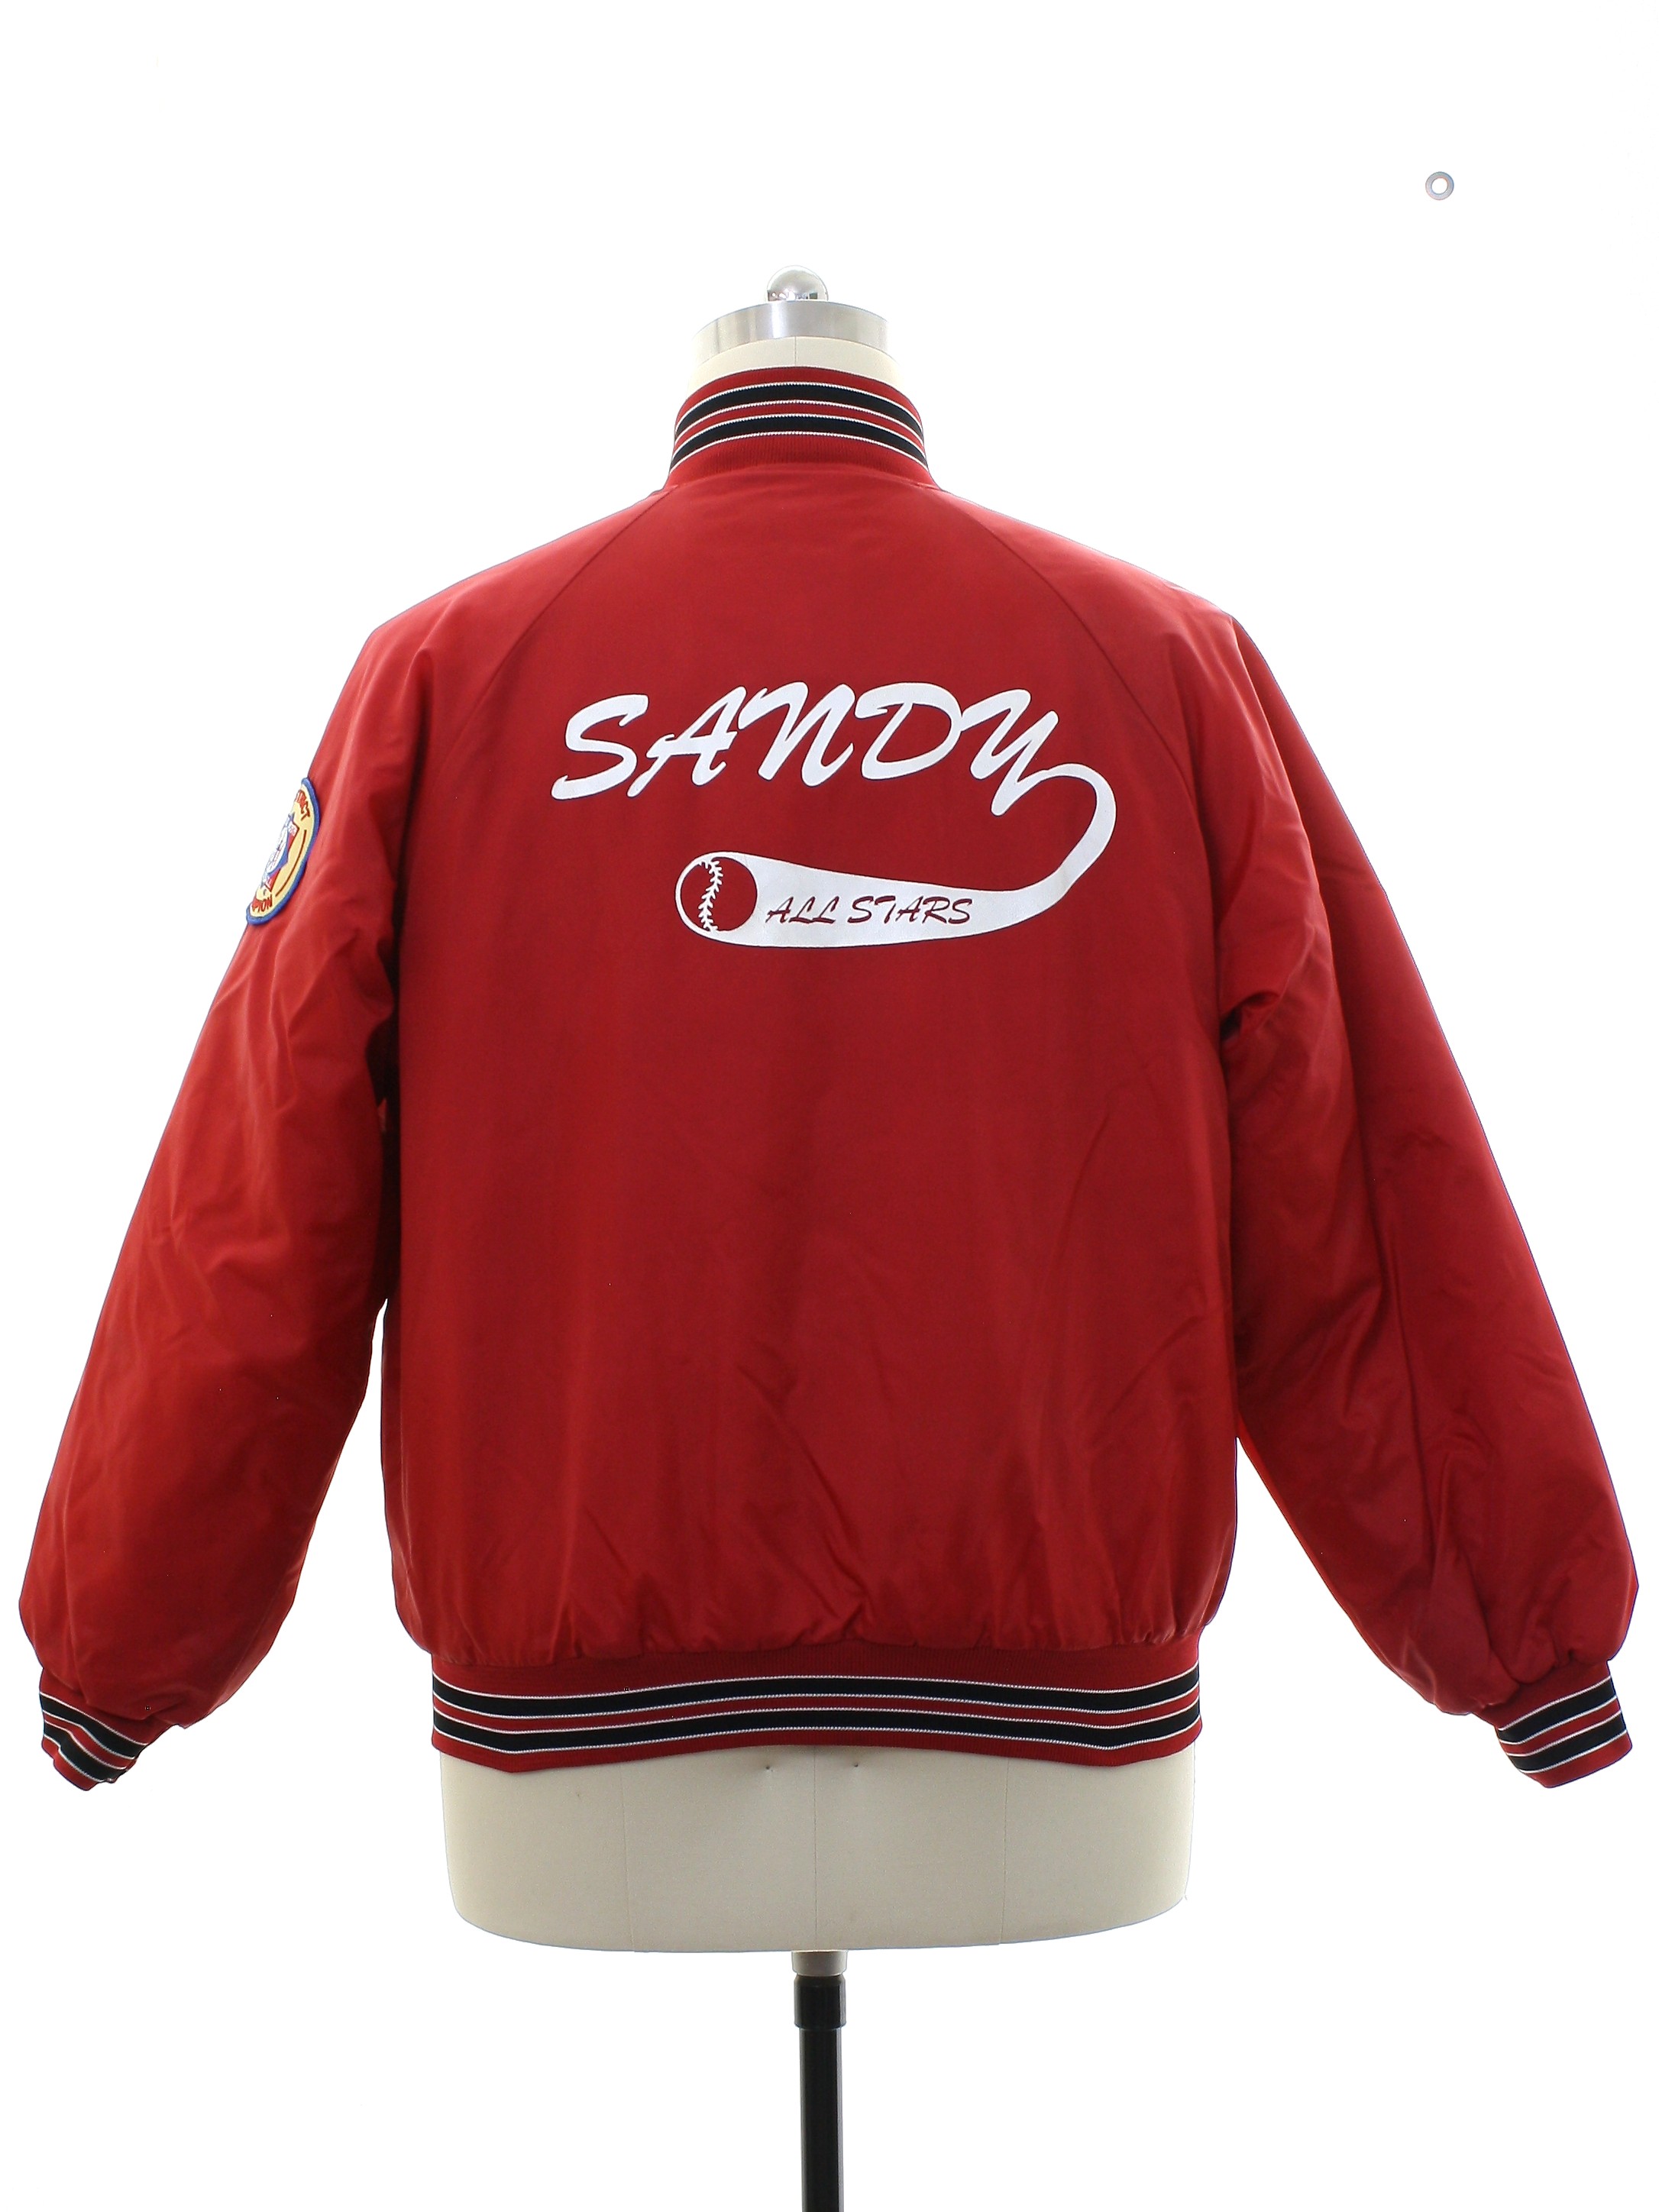 Retro 1980's Jacket (Hartwell Sports) : 80s -Hartwell Sports- Mens red ...